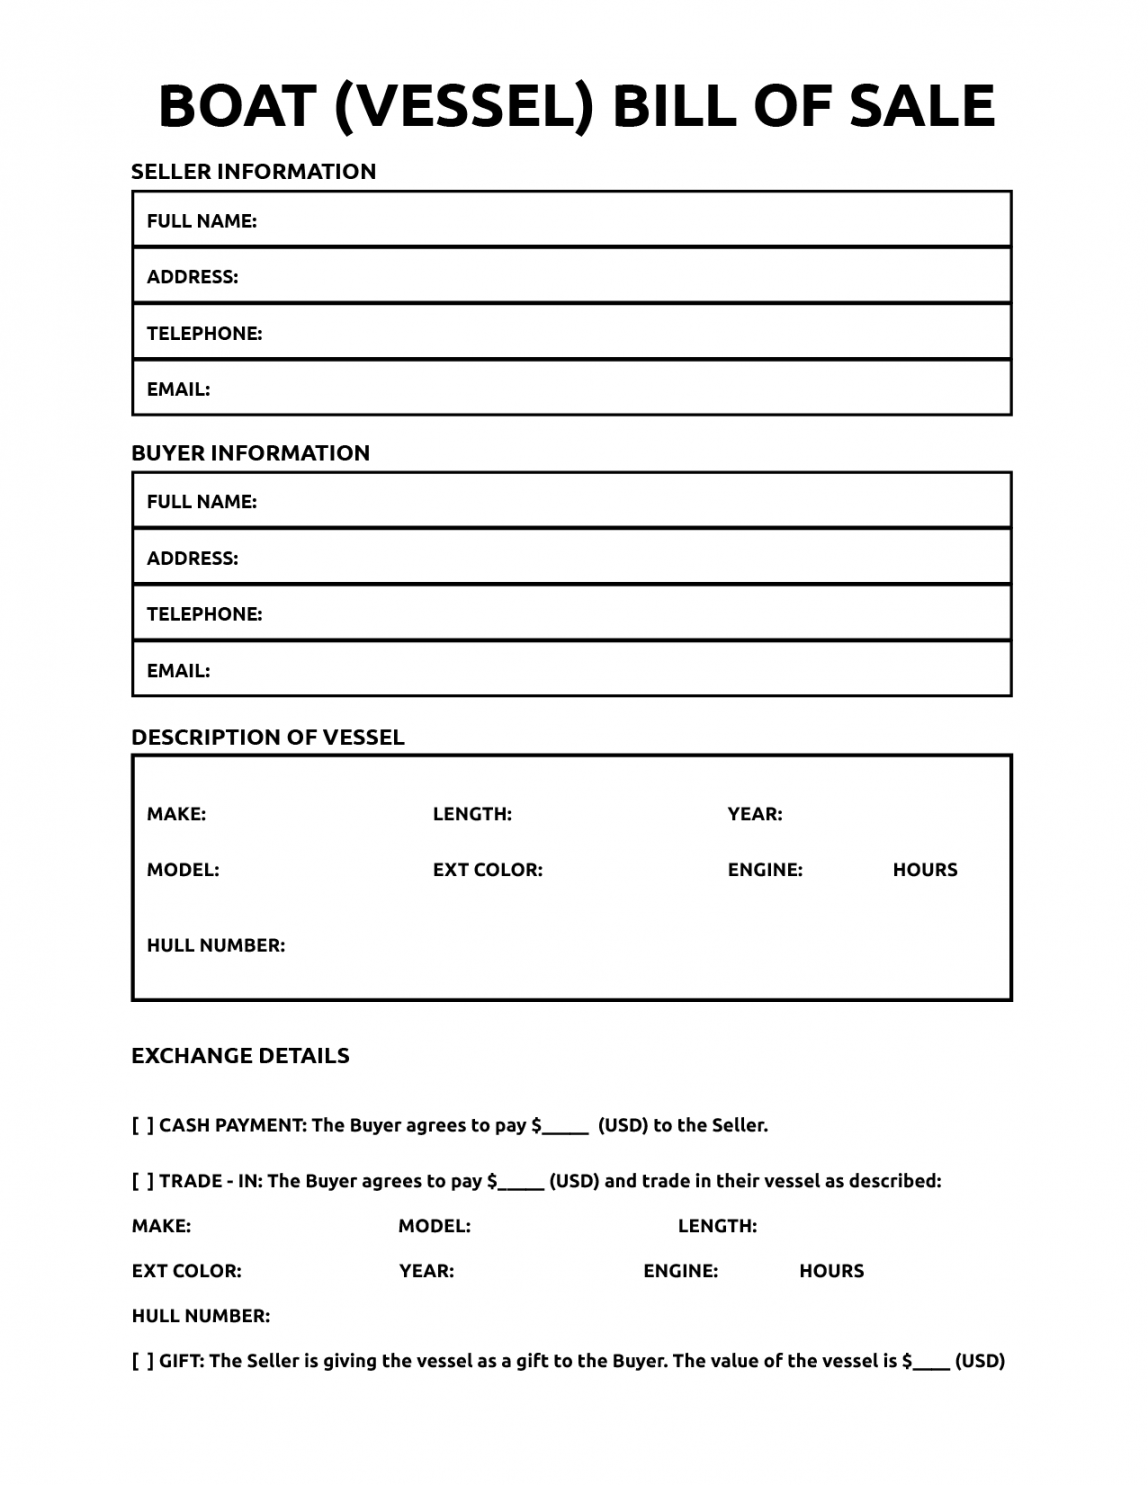 Bill of Sale For Boat - World of Printables - FREE Printables - Free Printable Bill Of Sale For Boat And Trailer